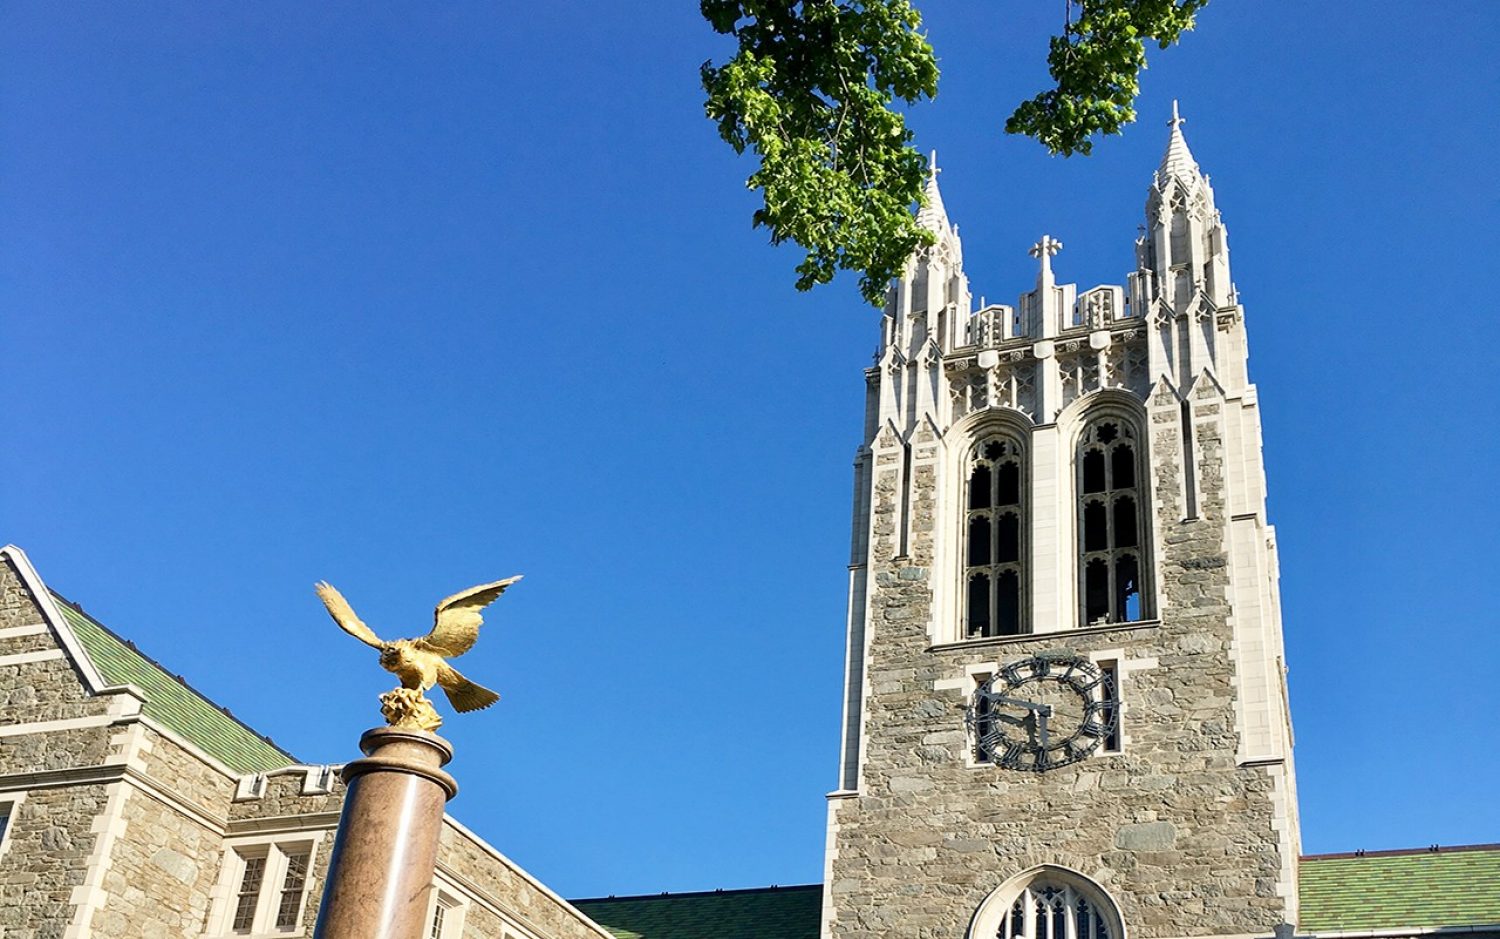 Gasson Hall and eagle statue